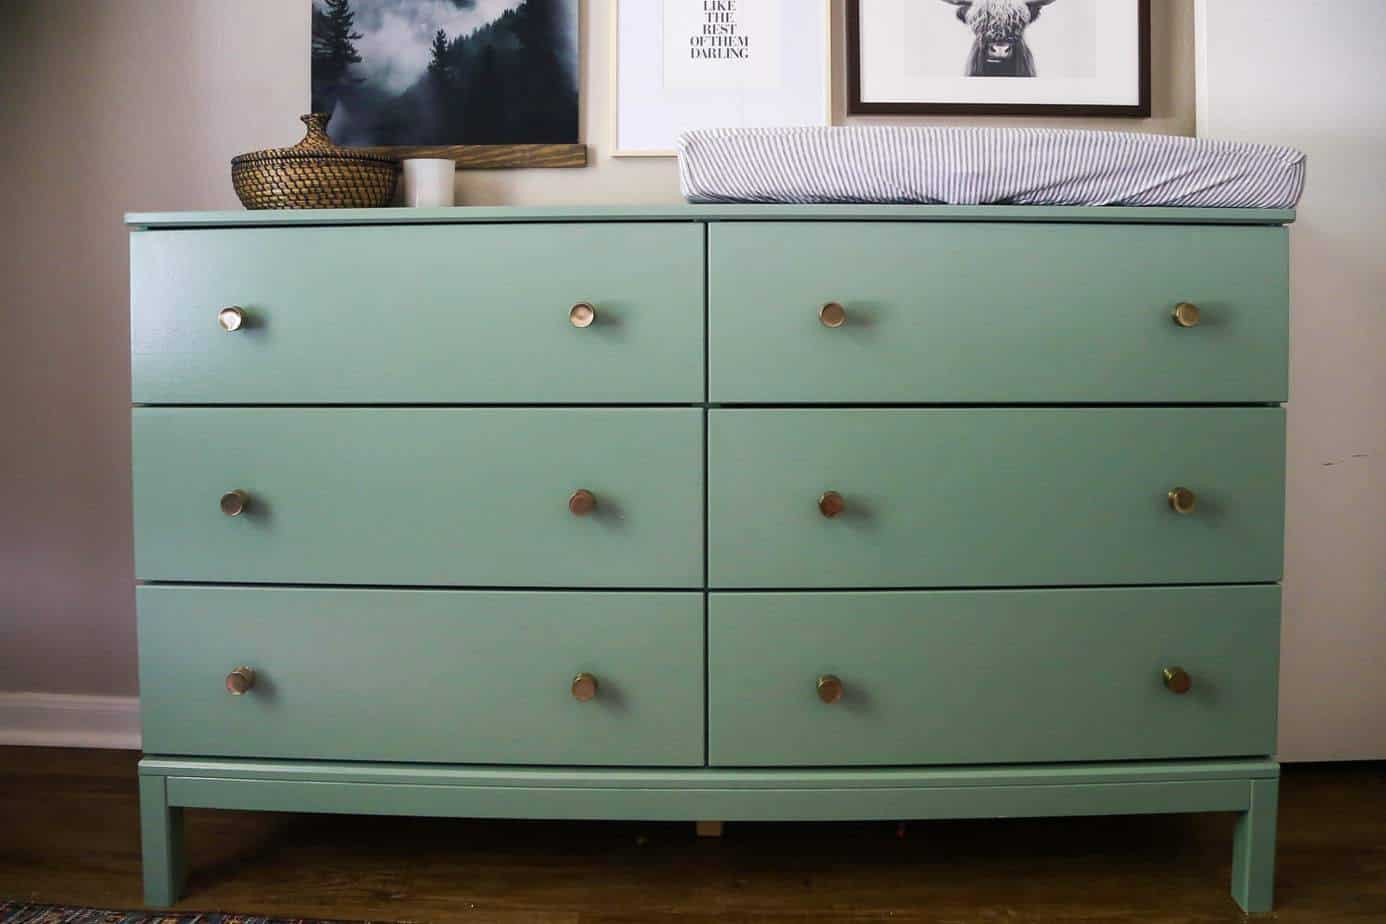 ikea dresser and changing table